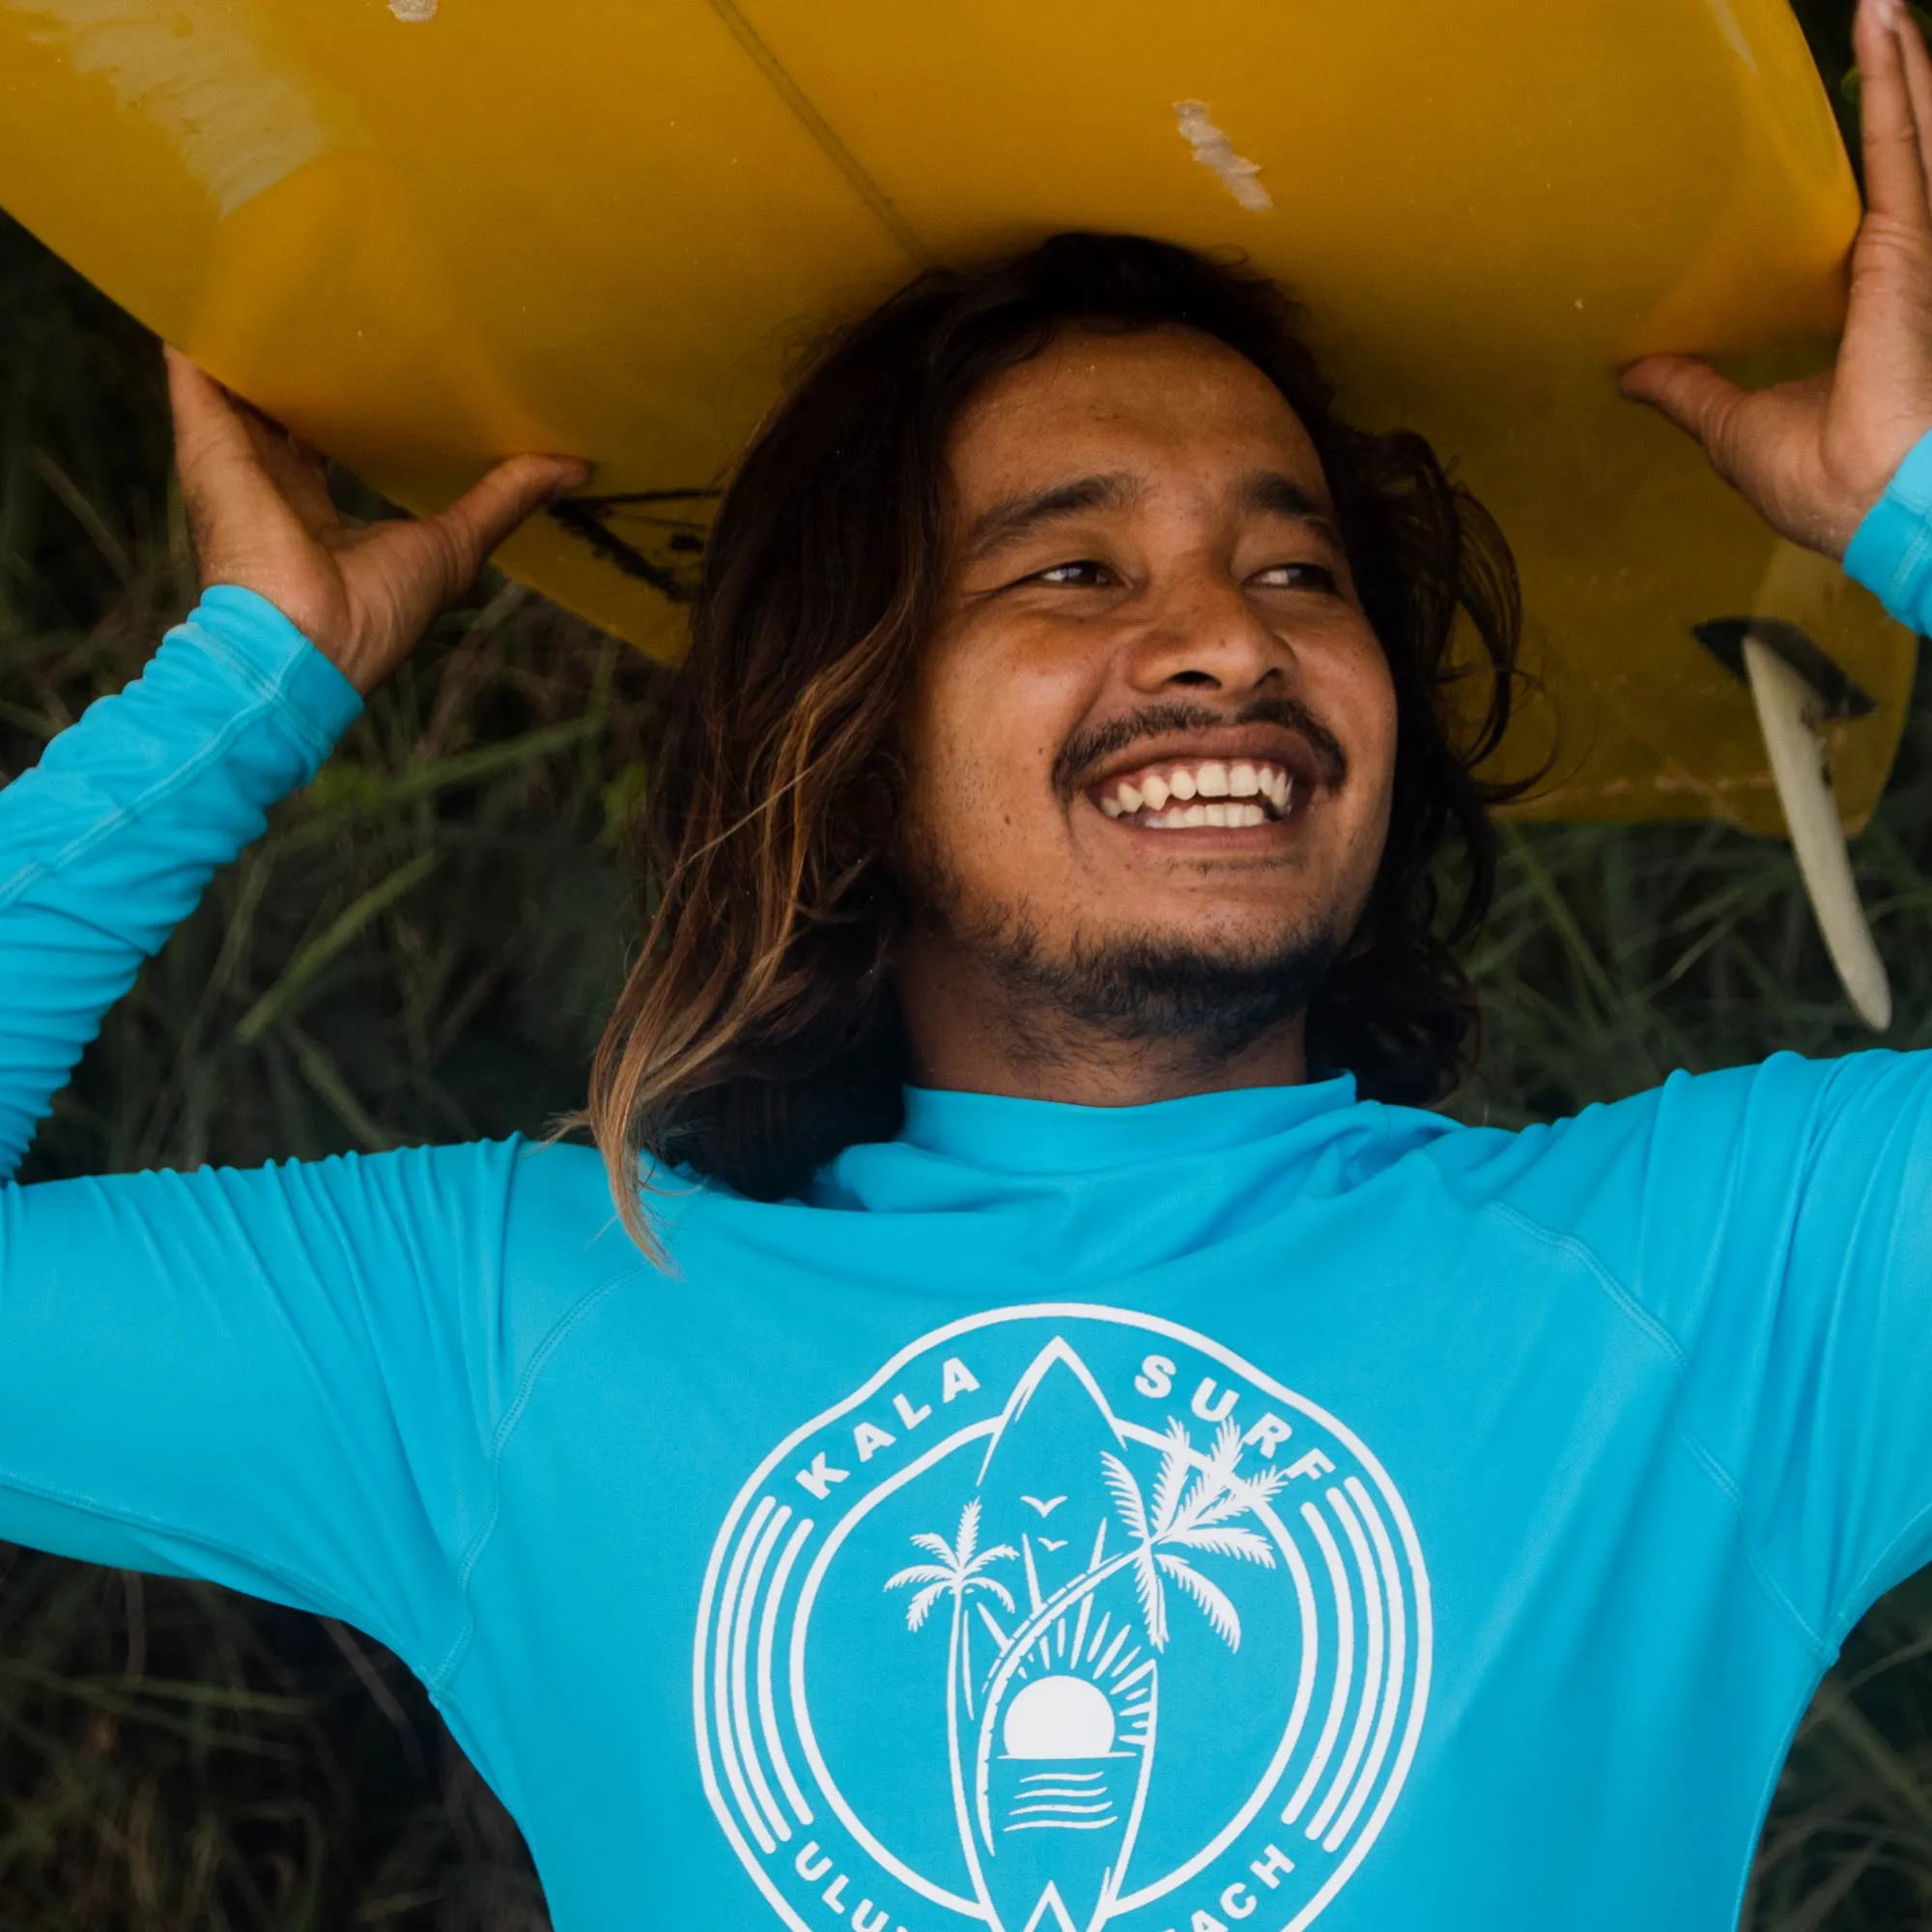 Welcome to the KALA SURFCAMP family 